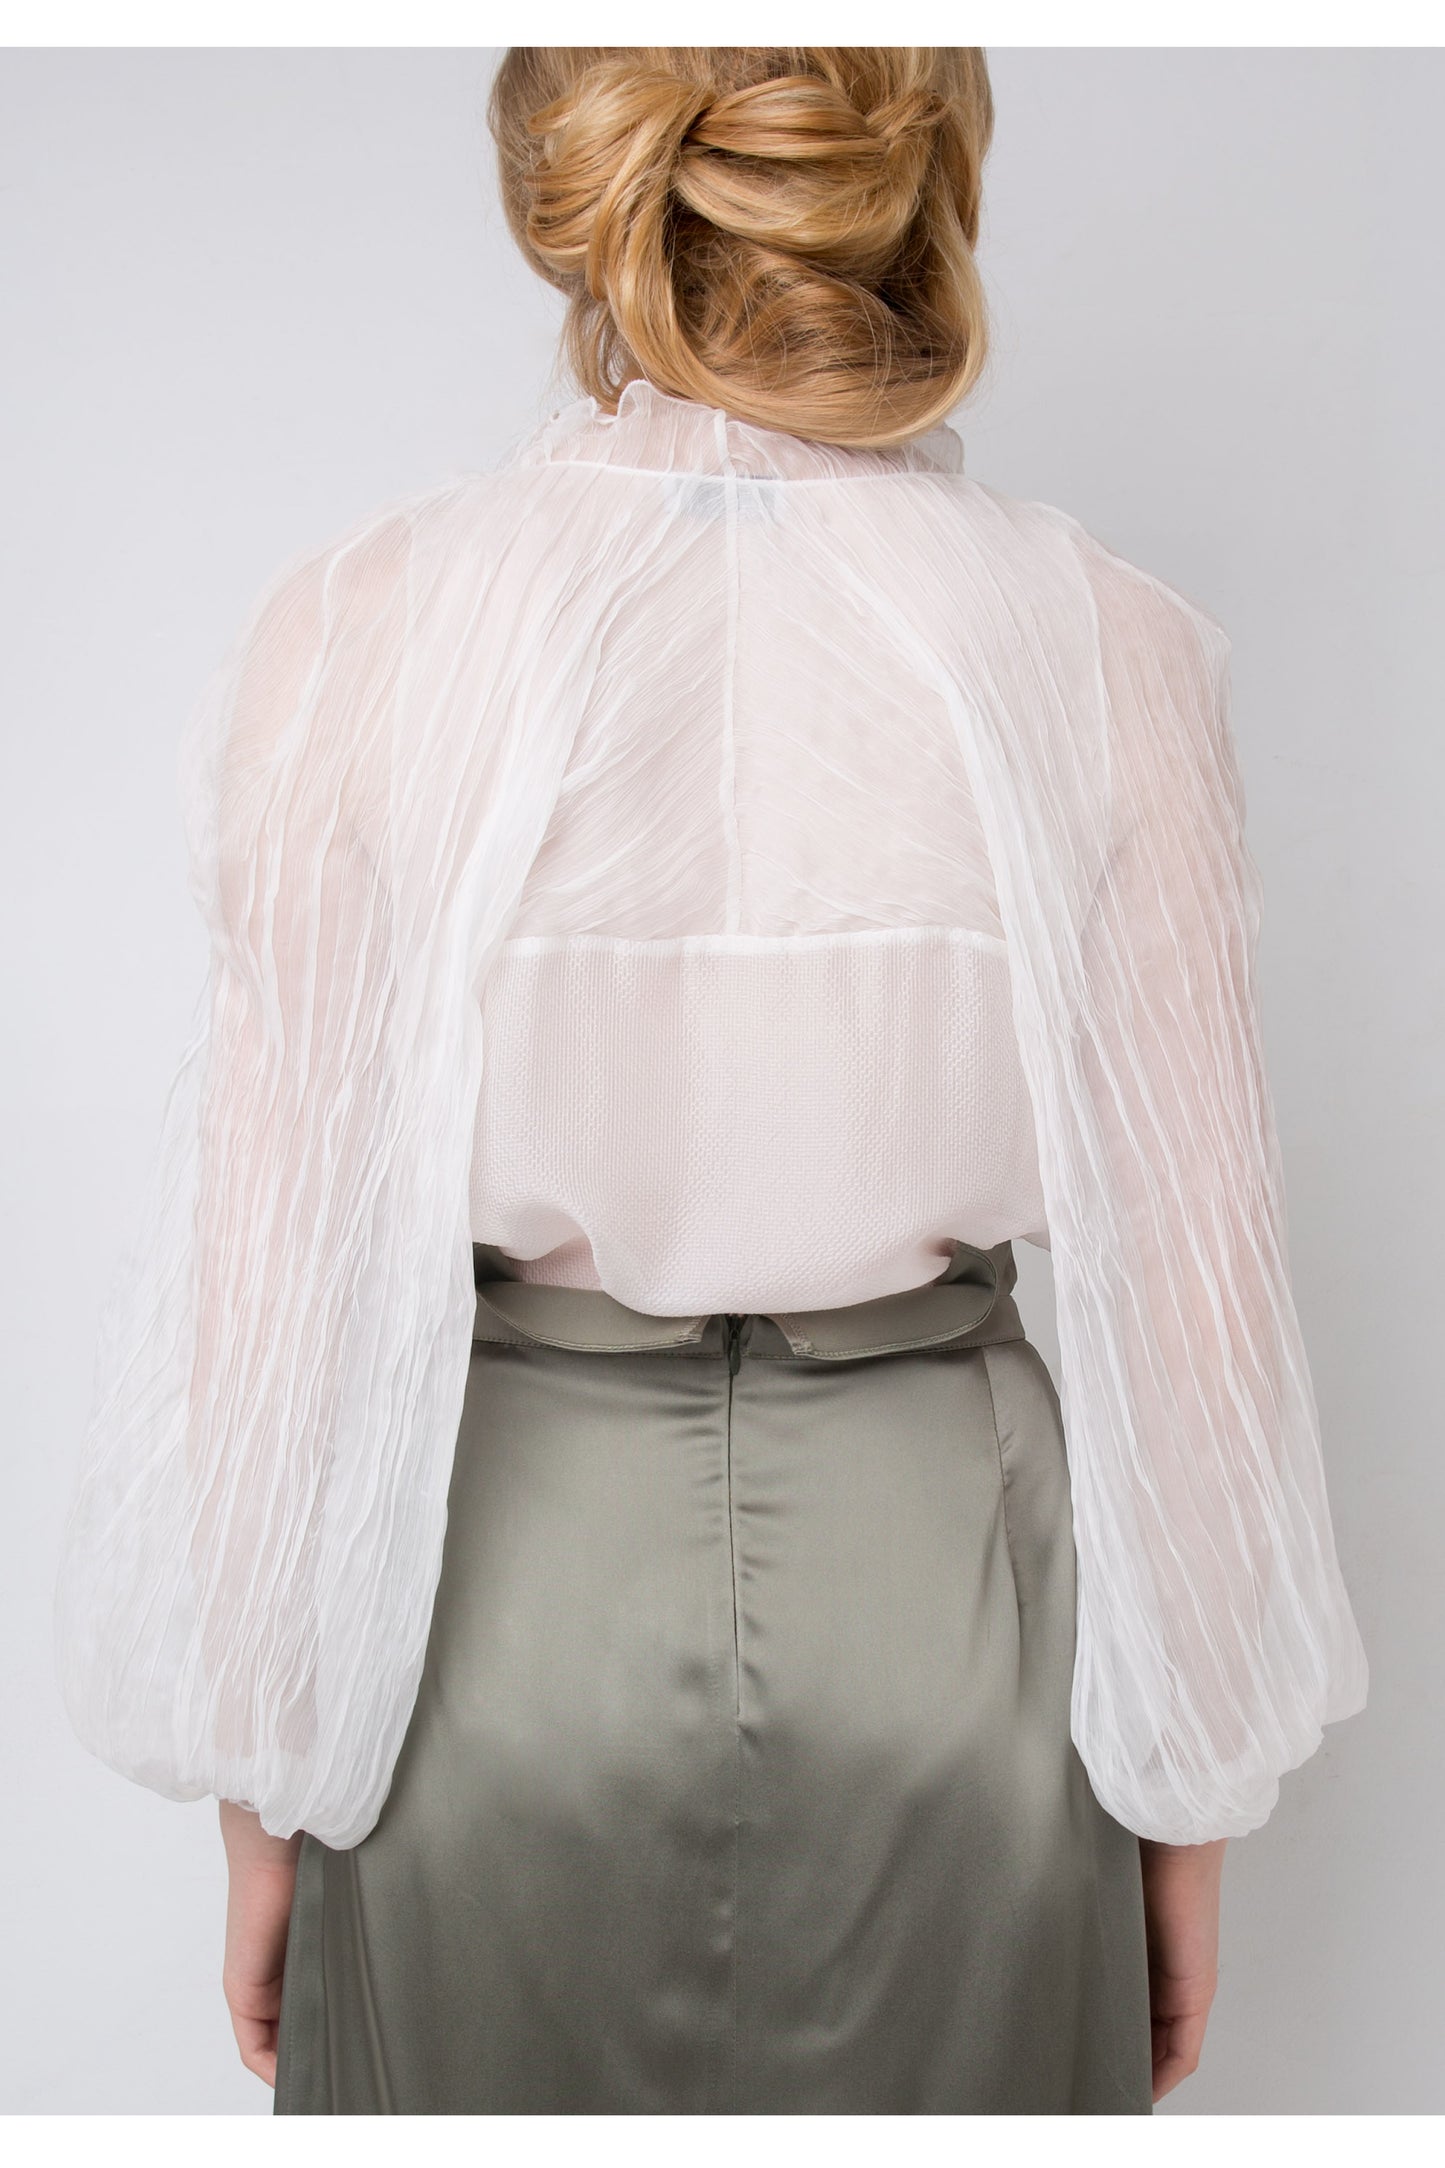 Pearl blouse